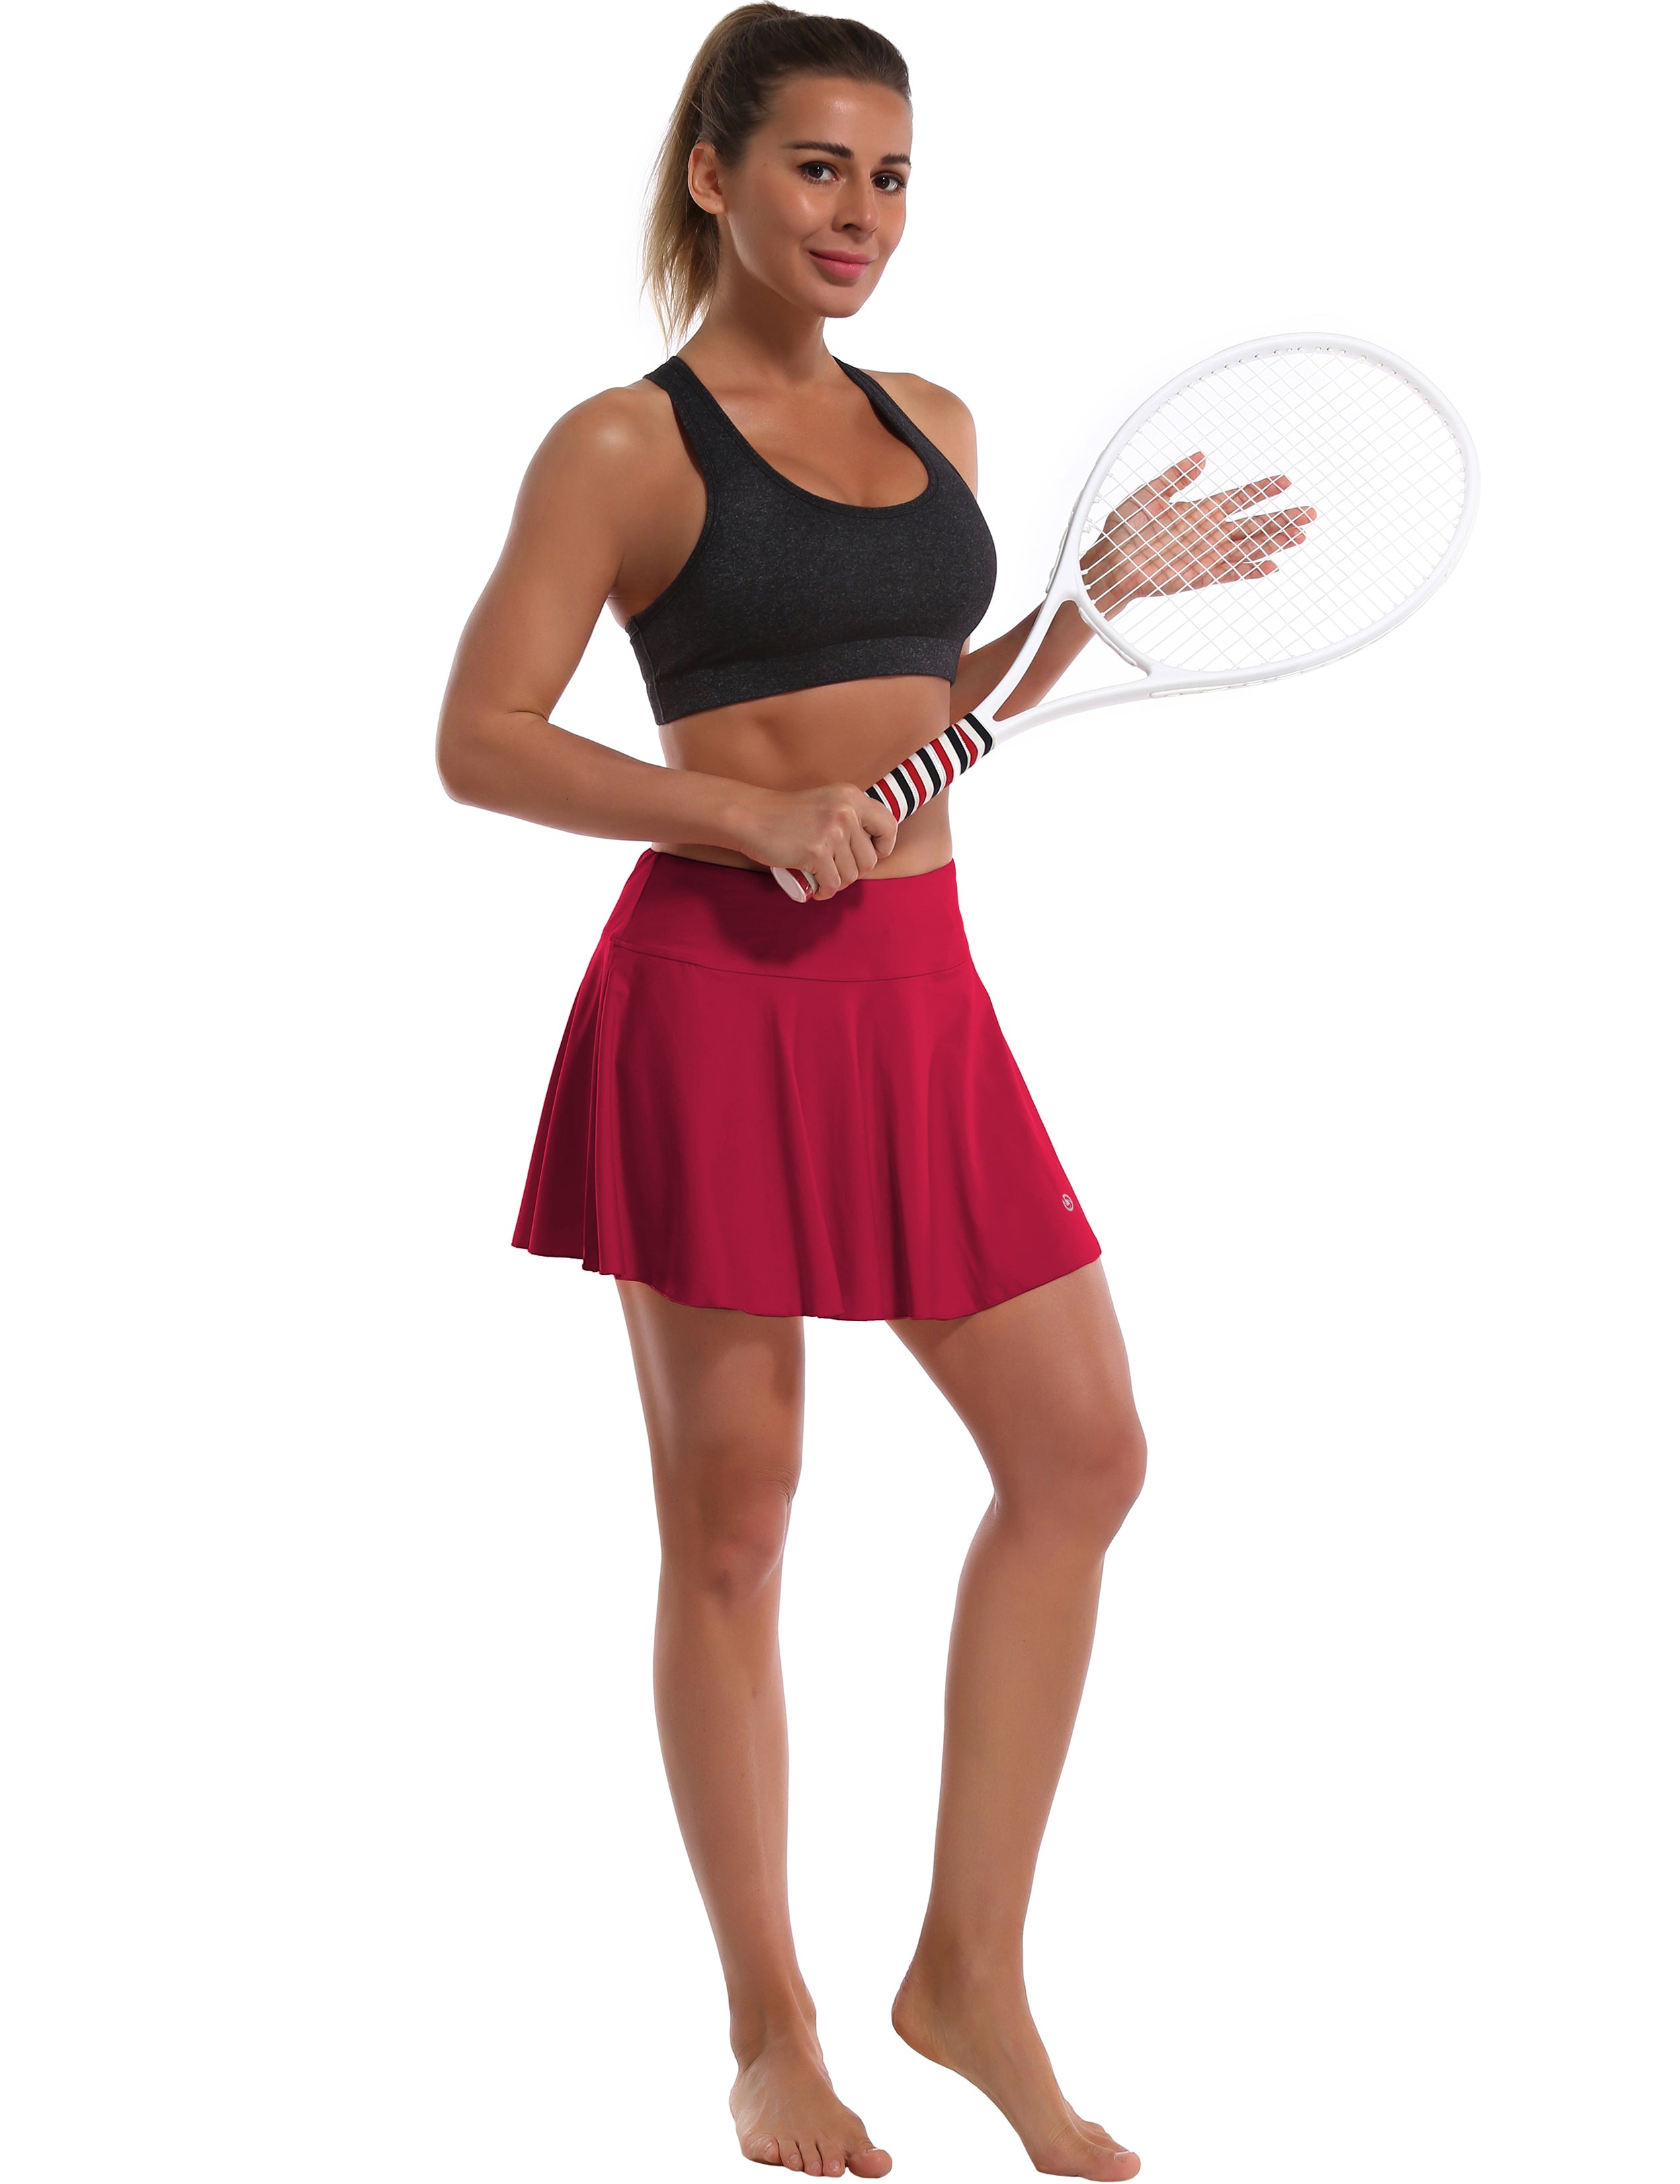 Athletic Tennis Golf Pleated Skort Awith Pocket Shorts rosecoral 80%Nylon/20%Spandex UPF 50+ sun protection Elastic closure Lightweight, Wrinkle Moisture wicking Quick drying Secure & comfortable two layer Hidden pocket